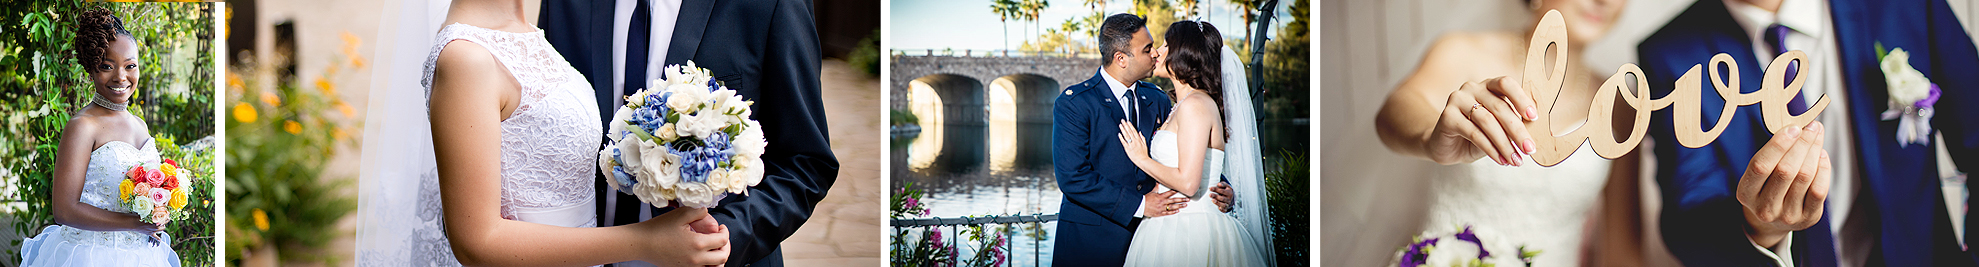 Las Vegas Wedding Special Packages Available at Always and Forever Weddings and Receptions in Desert Shores